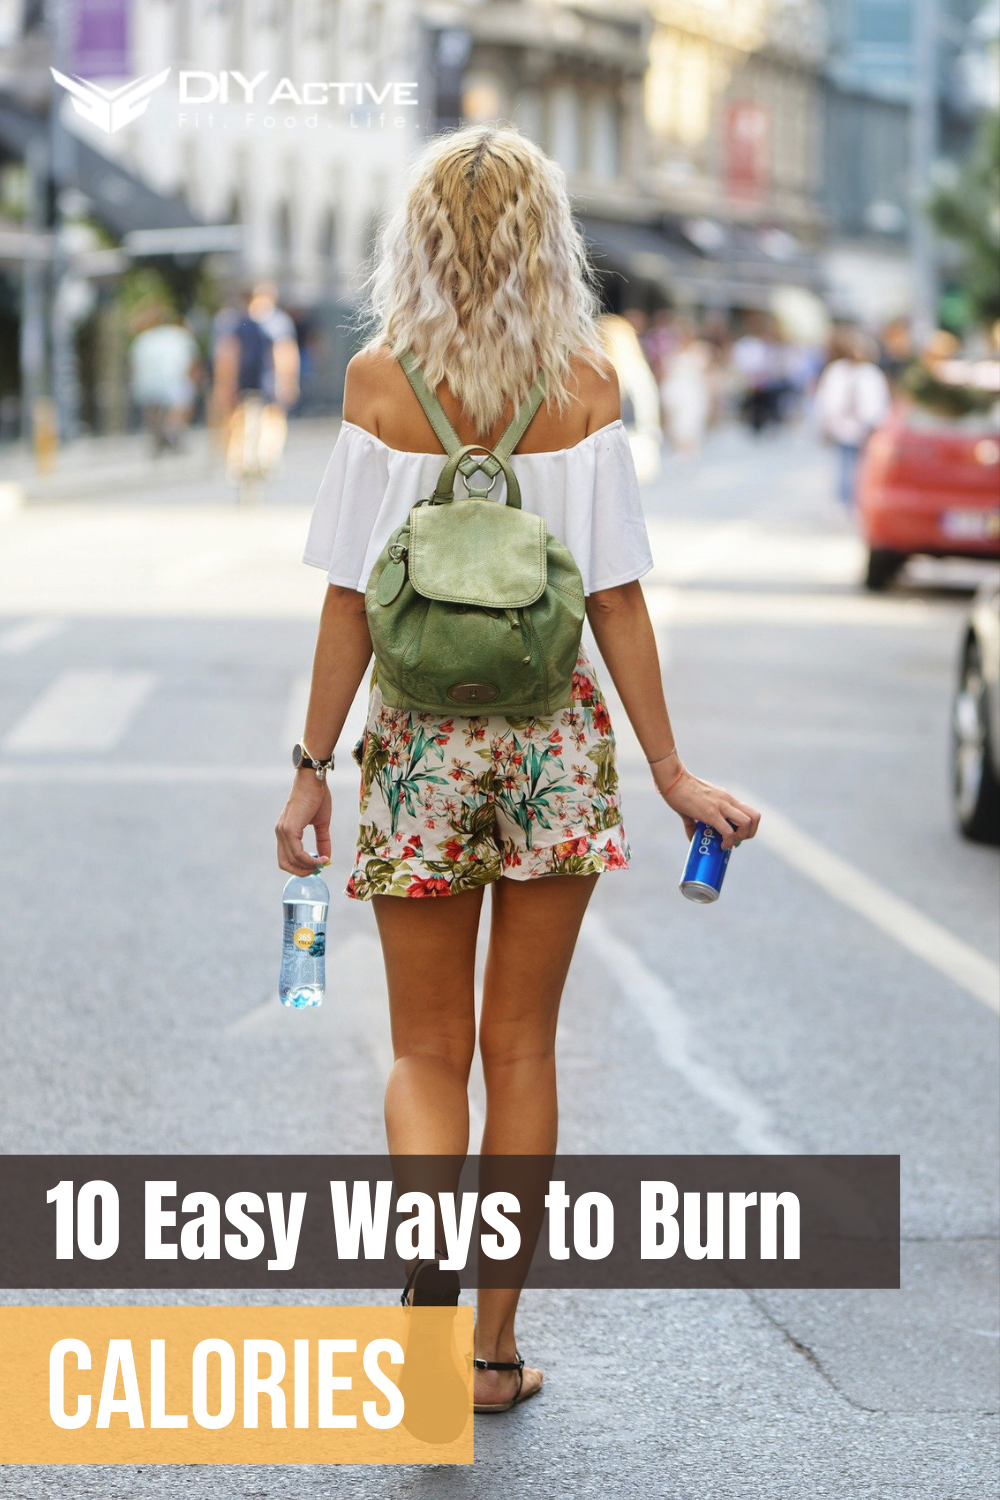 Top 10 Easy Ways to Burn Calories Without Effort